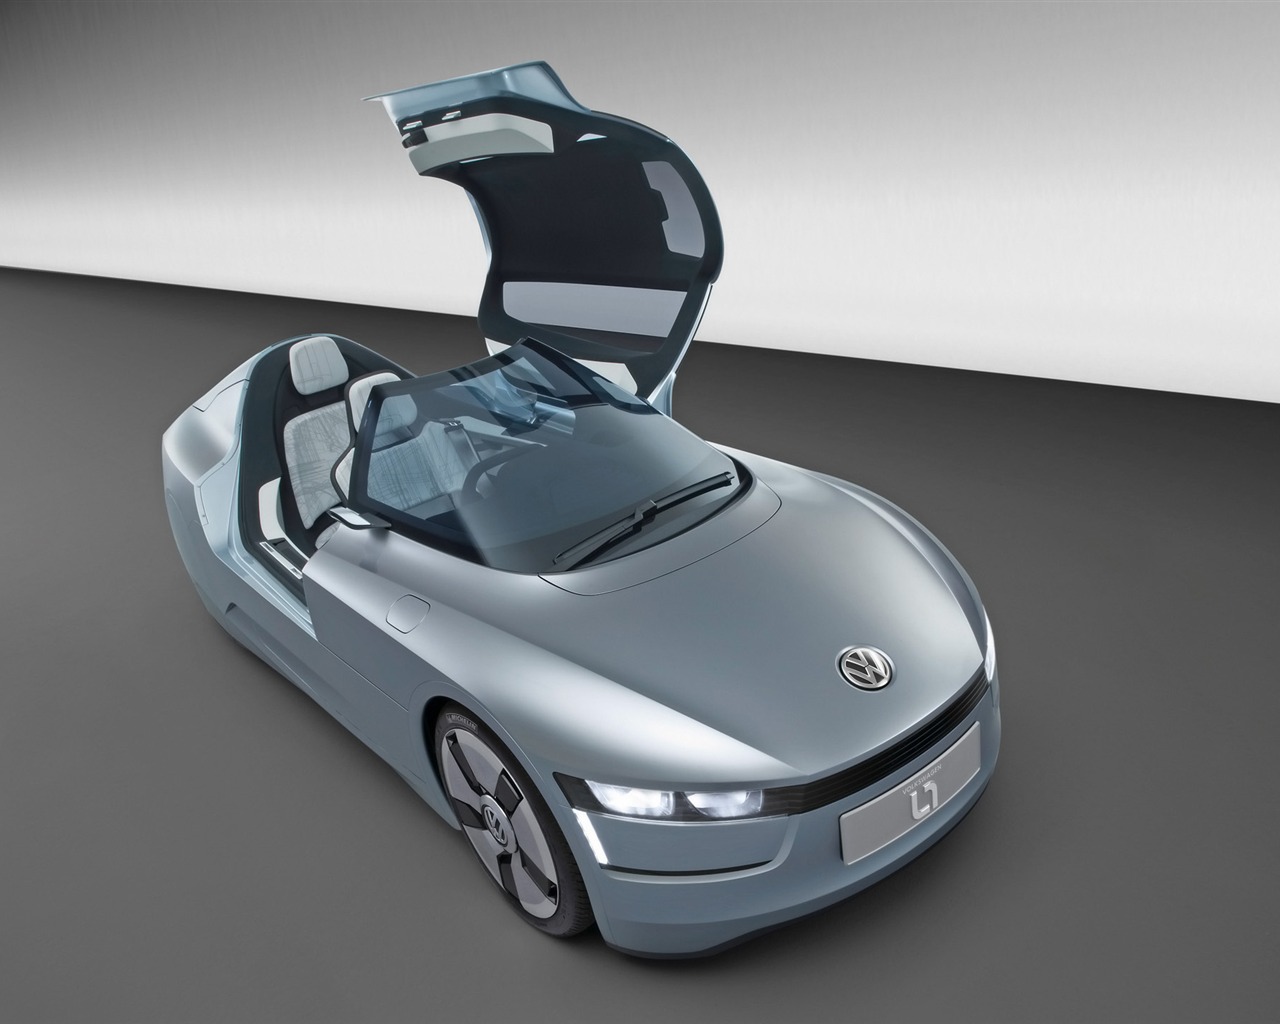 Volkswagen L1 Tapety Concept Car #22 - 1280x1024